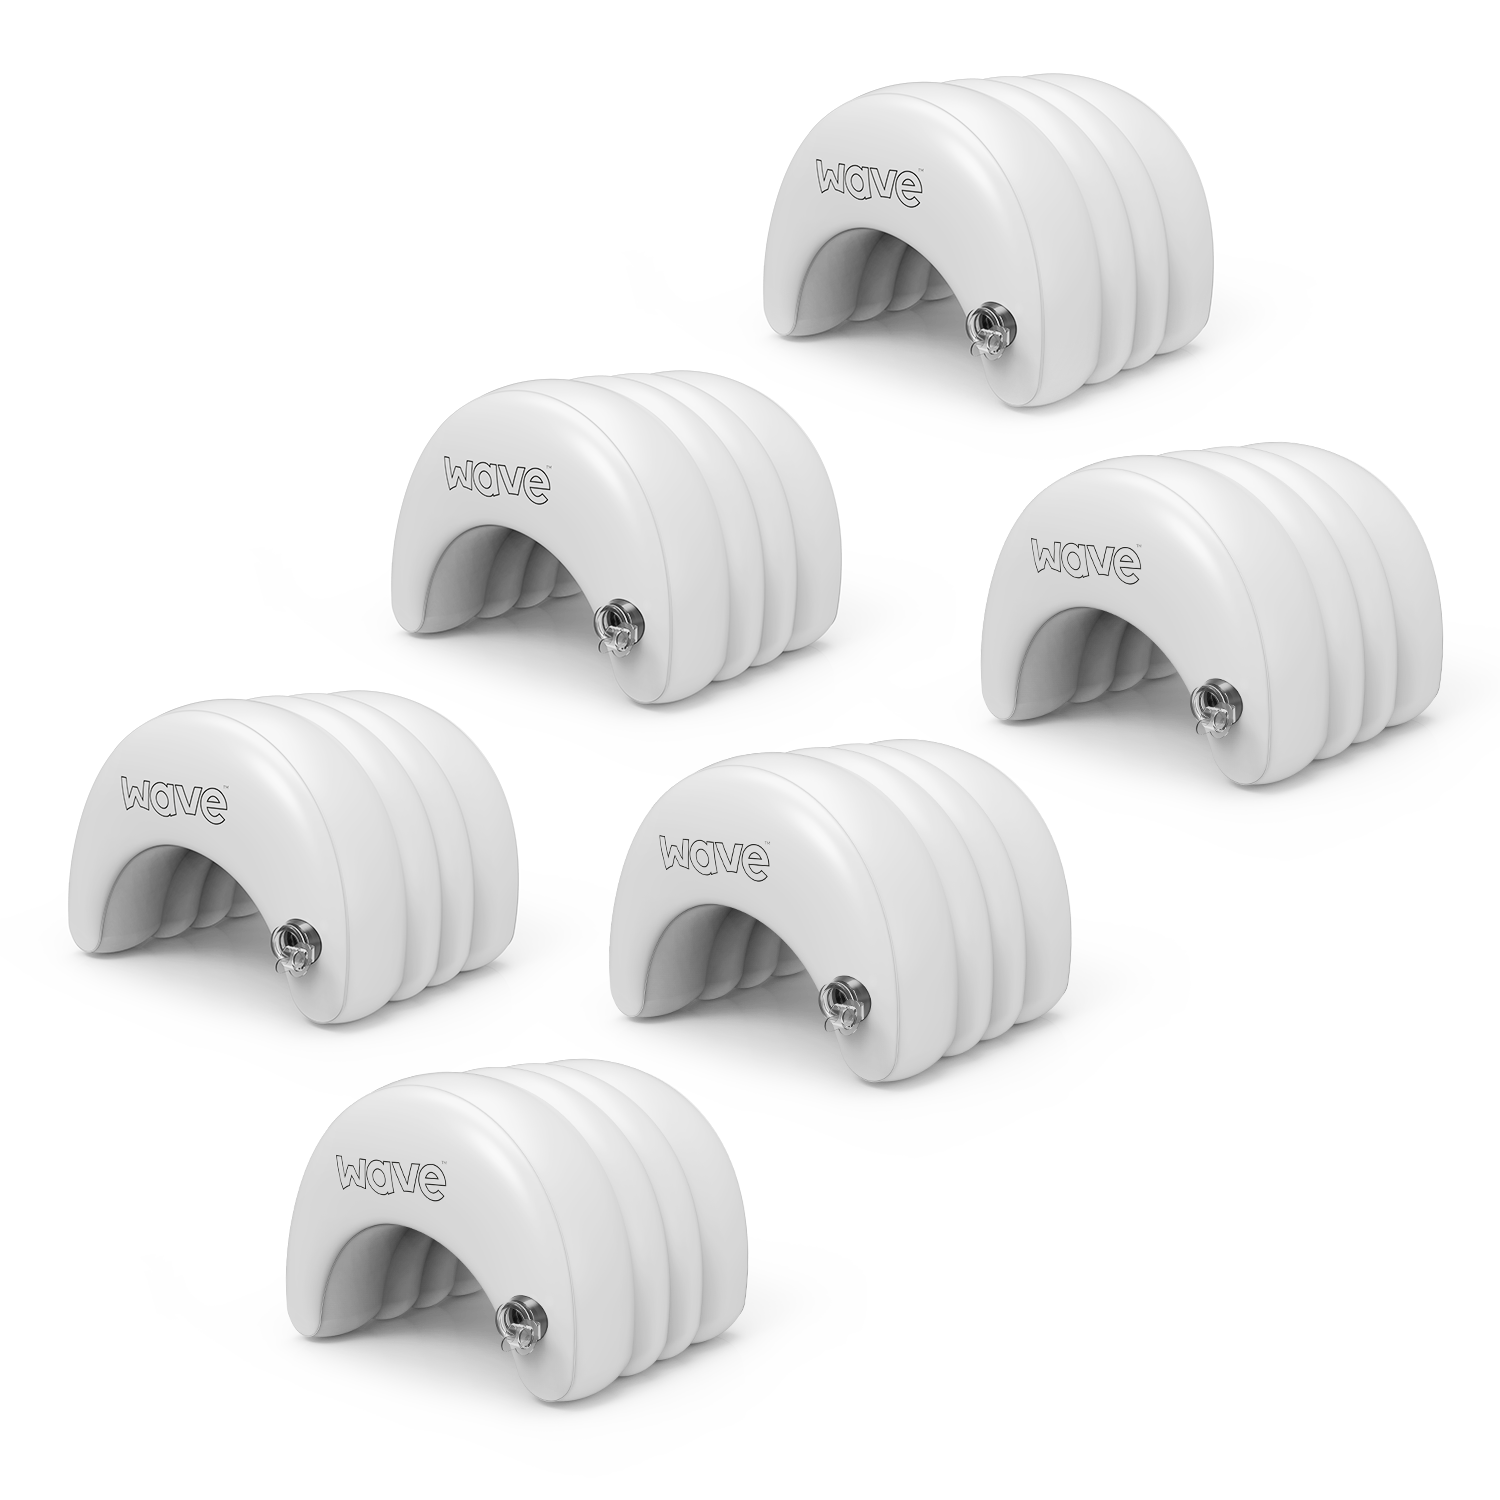 Wave Spa Inflatable Head Rest Pillow, White - 6 pack - Wave Spas Inflatable, foam Hot Tubs